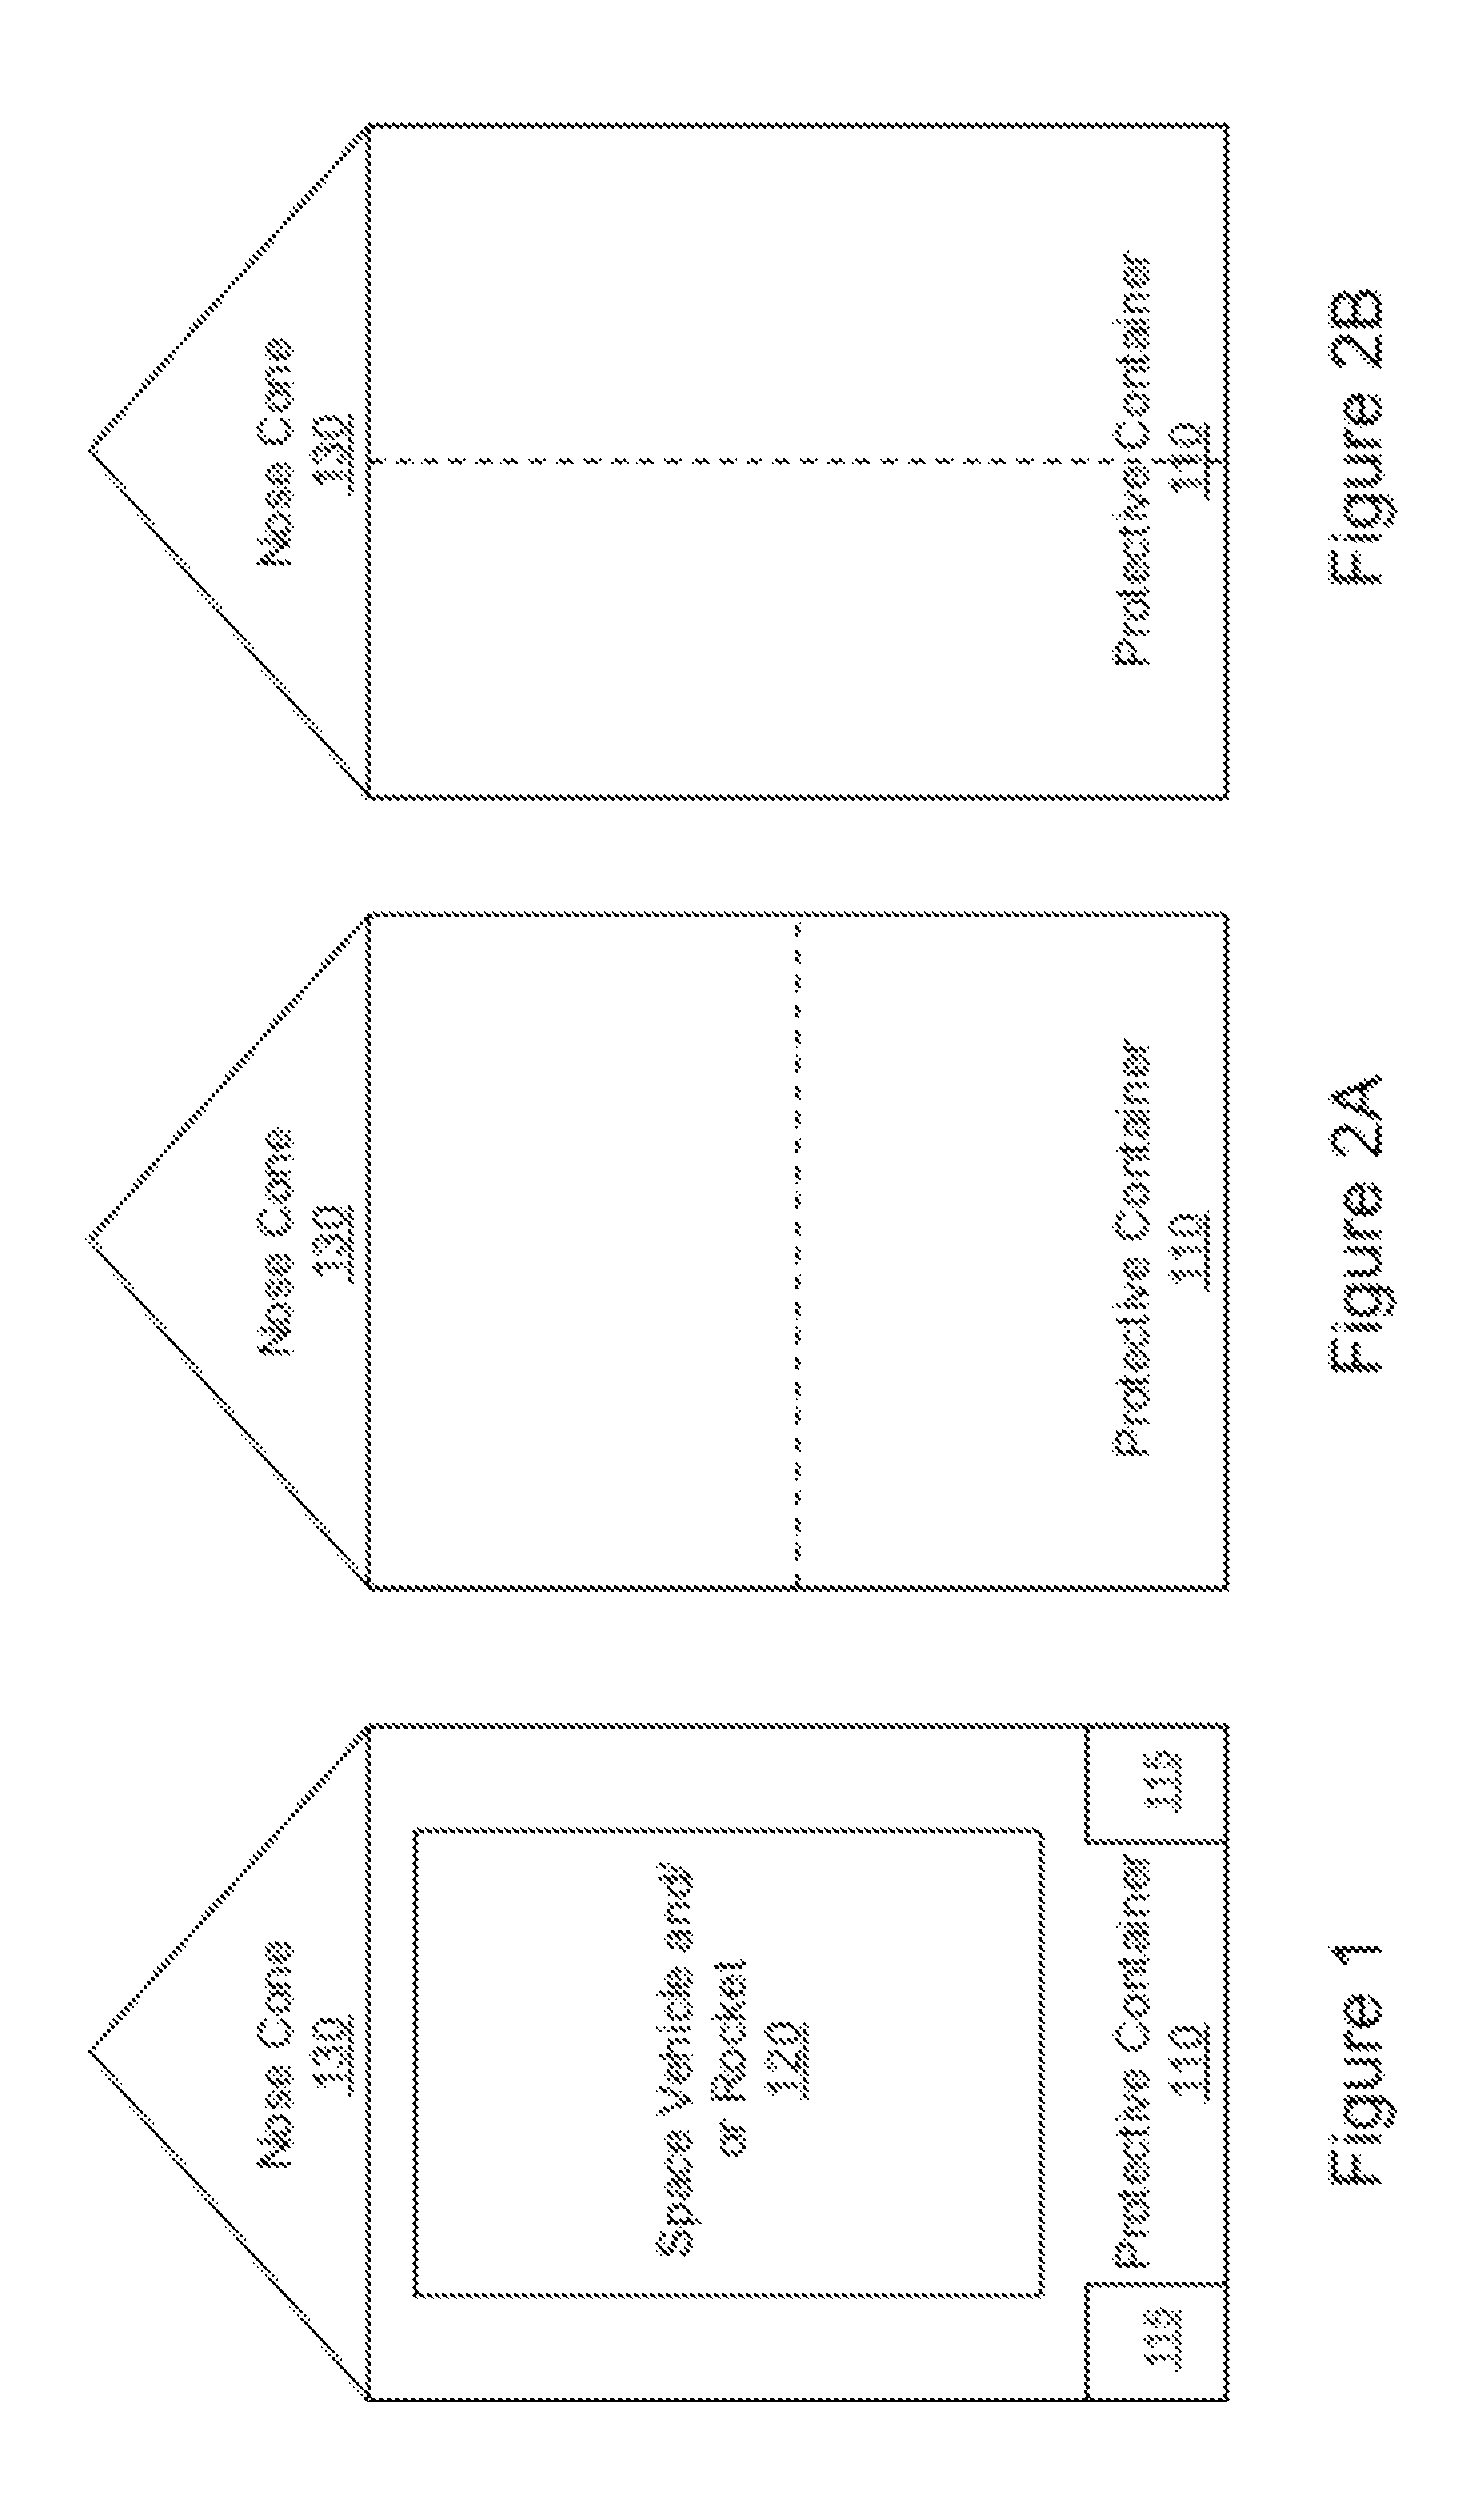 Systems and methods for launching space vehicles